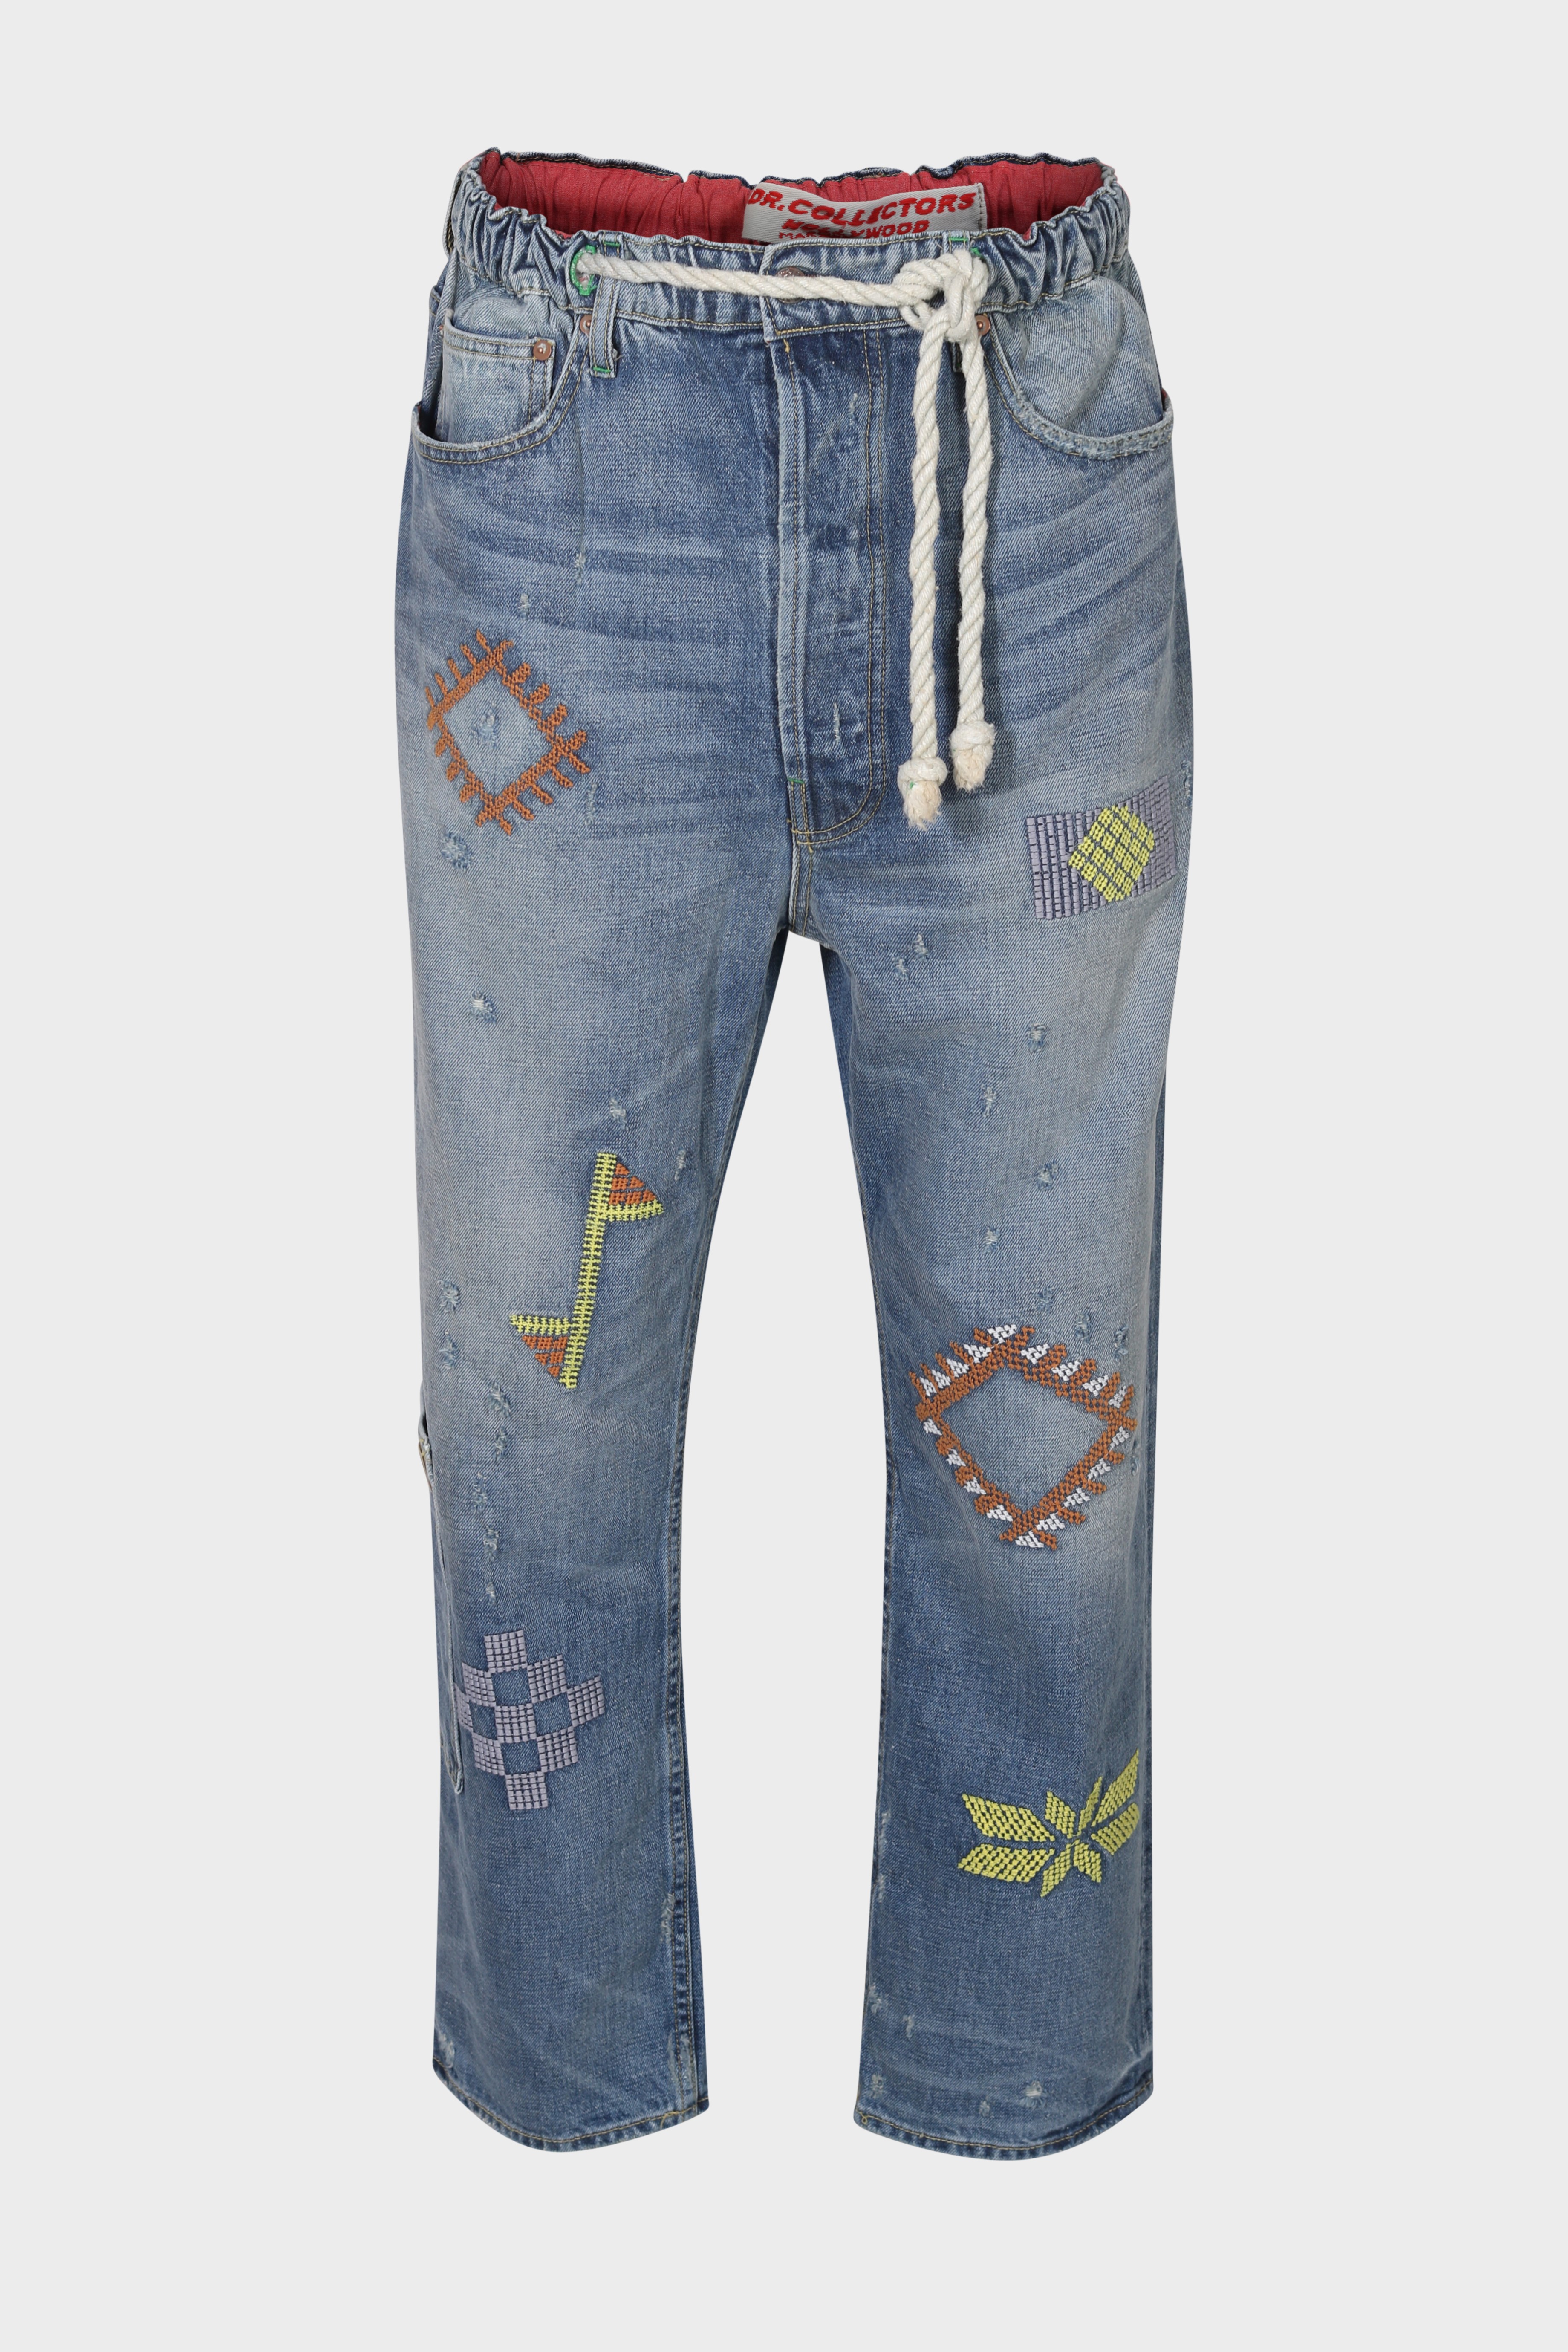 DR. COLLECTORS Embroidered Japanese Denim in Sunfaded Blue